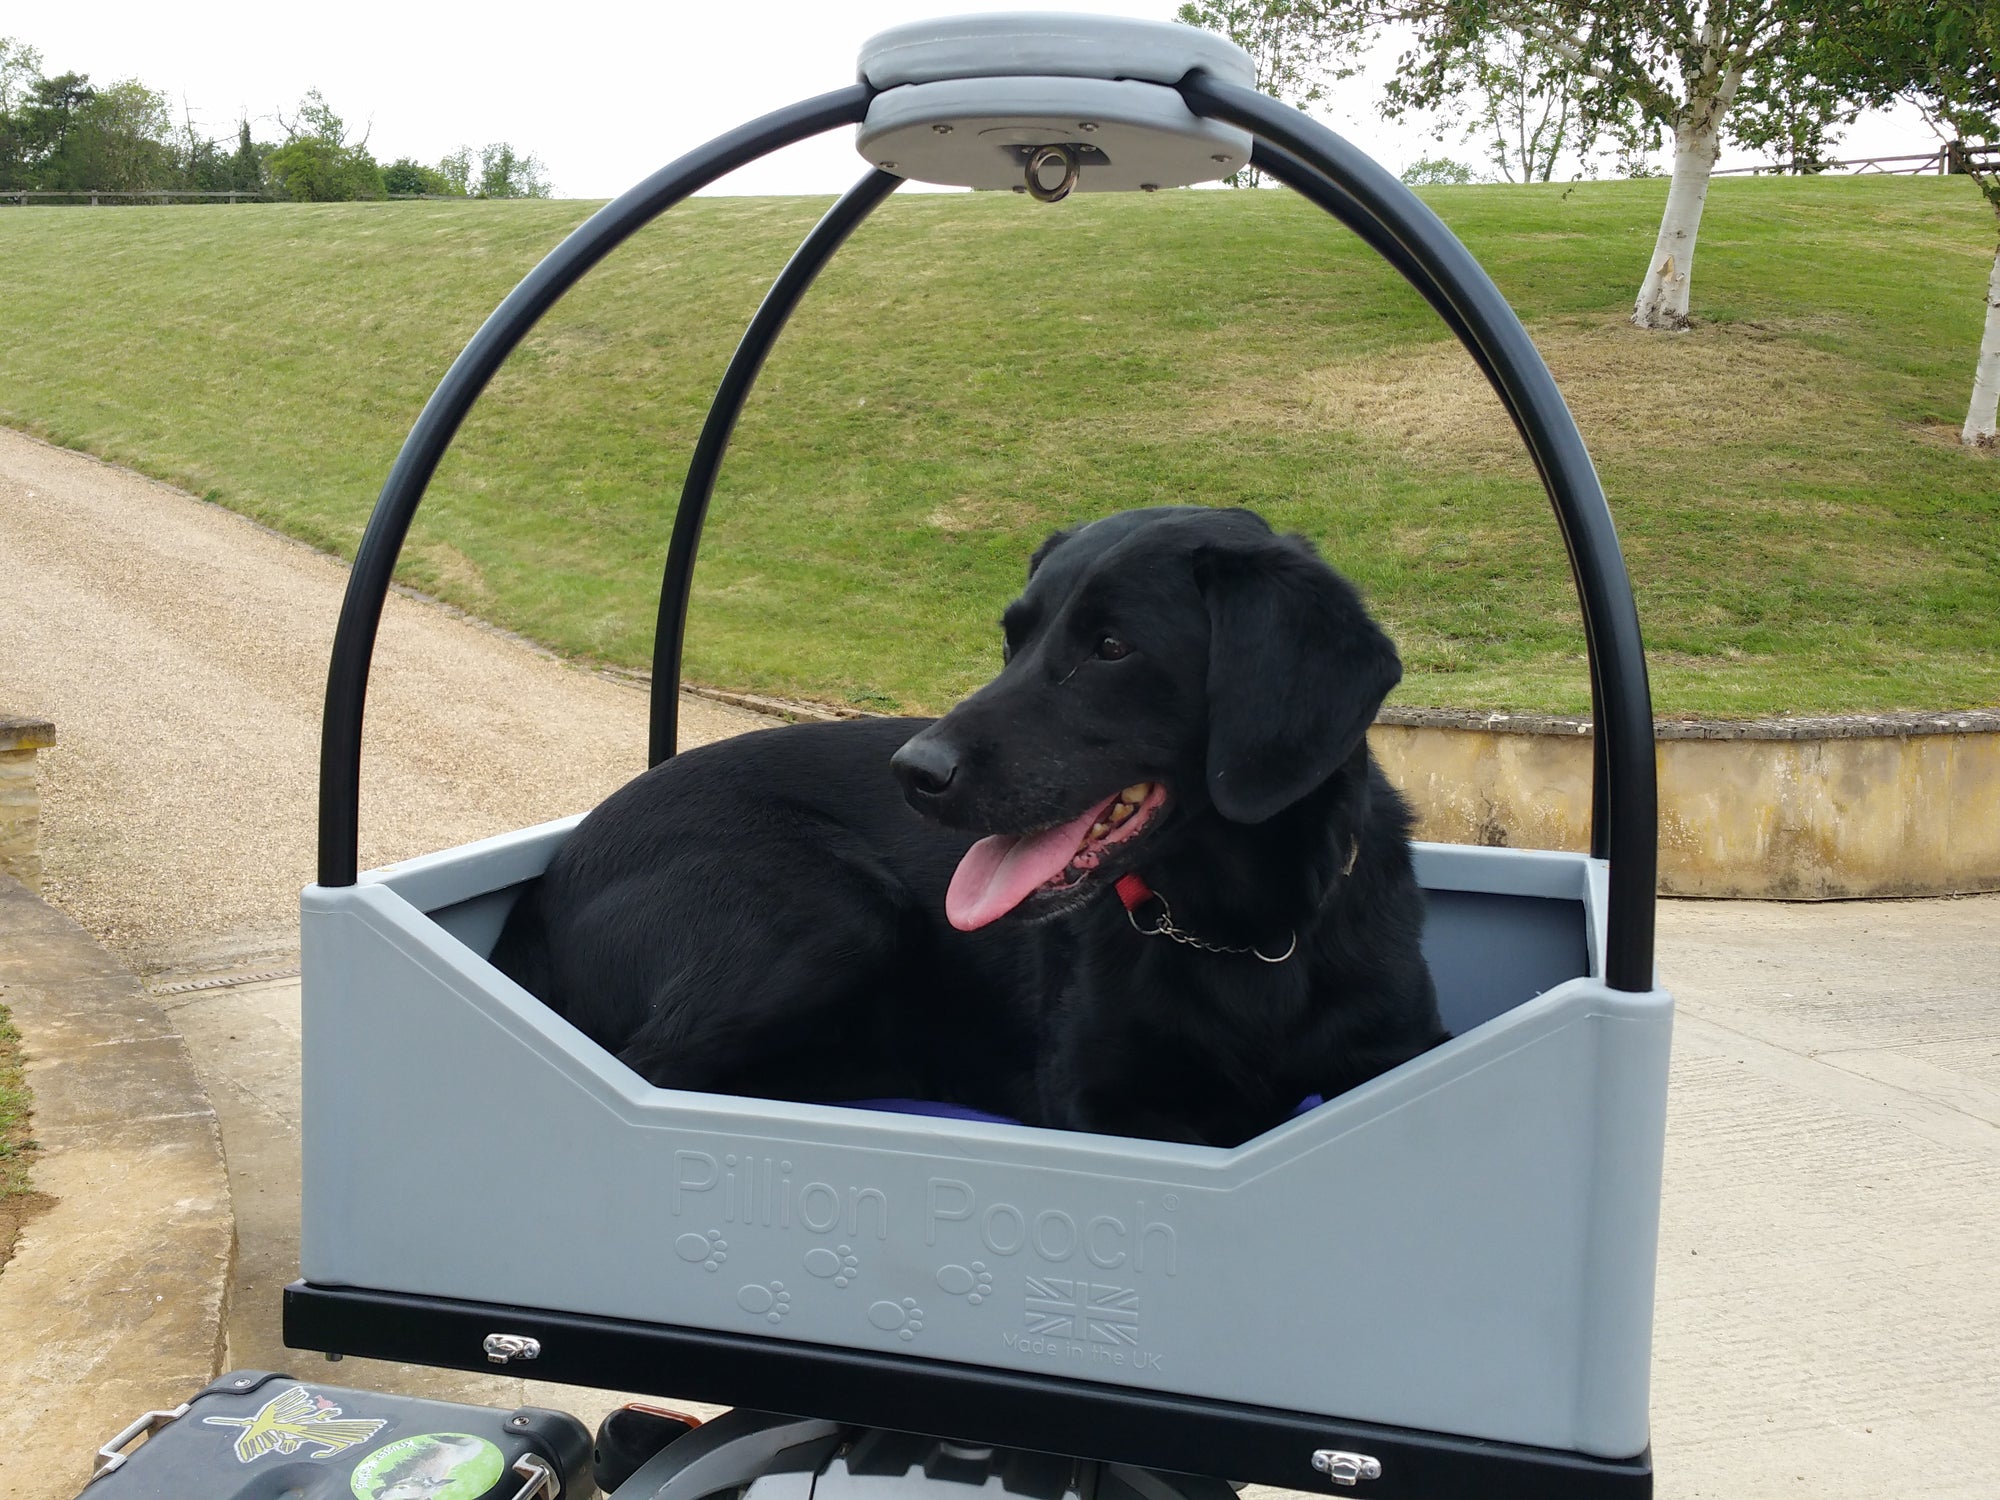 Pillion Pooch Motorcycle Dog Carrier frame without the cover and a Labrador comfortably sitting inside. Photo from Nikki of her dog Ellie from the UK